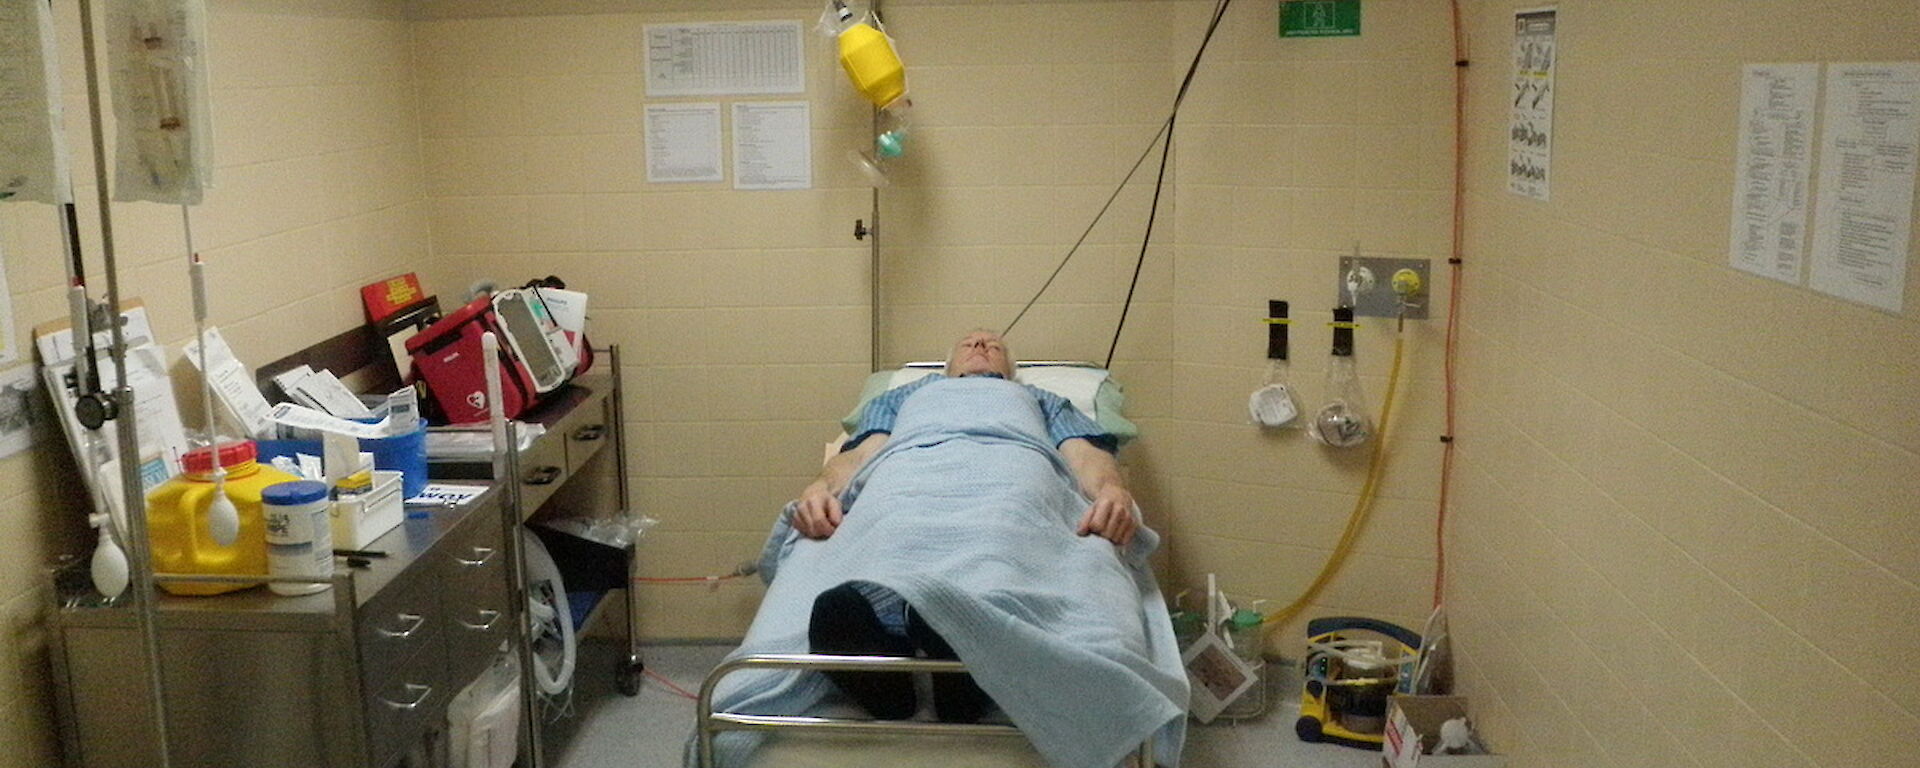 Medical training — a man lies in a hospital bed pretending to be a patient waiting for surgery